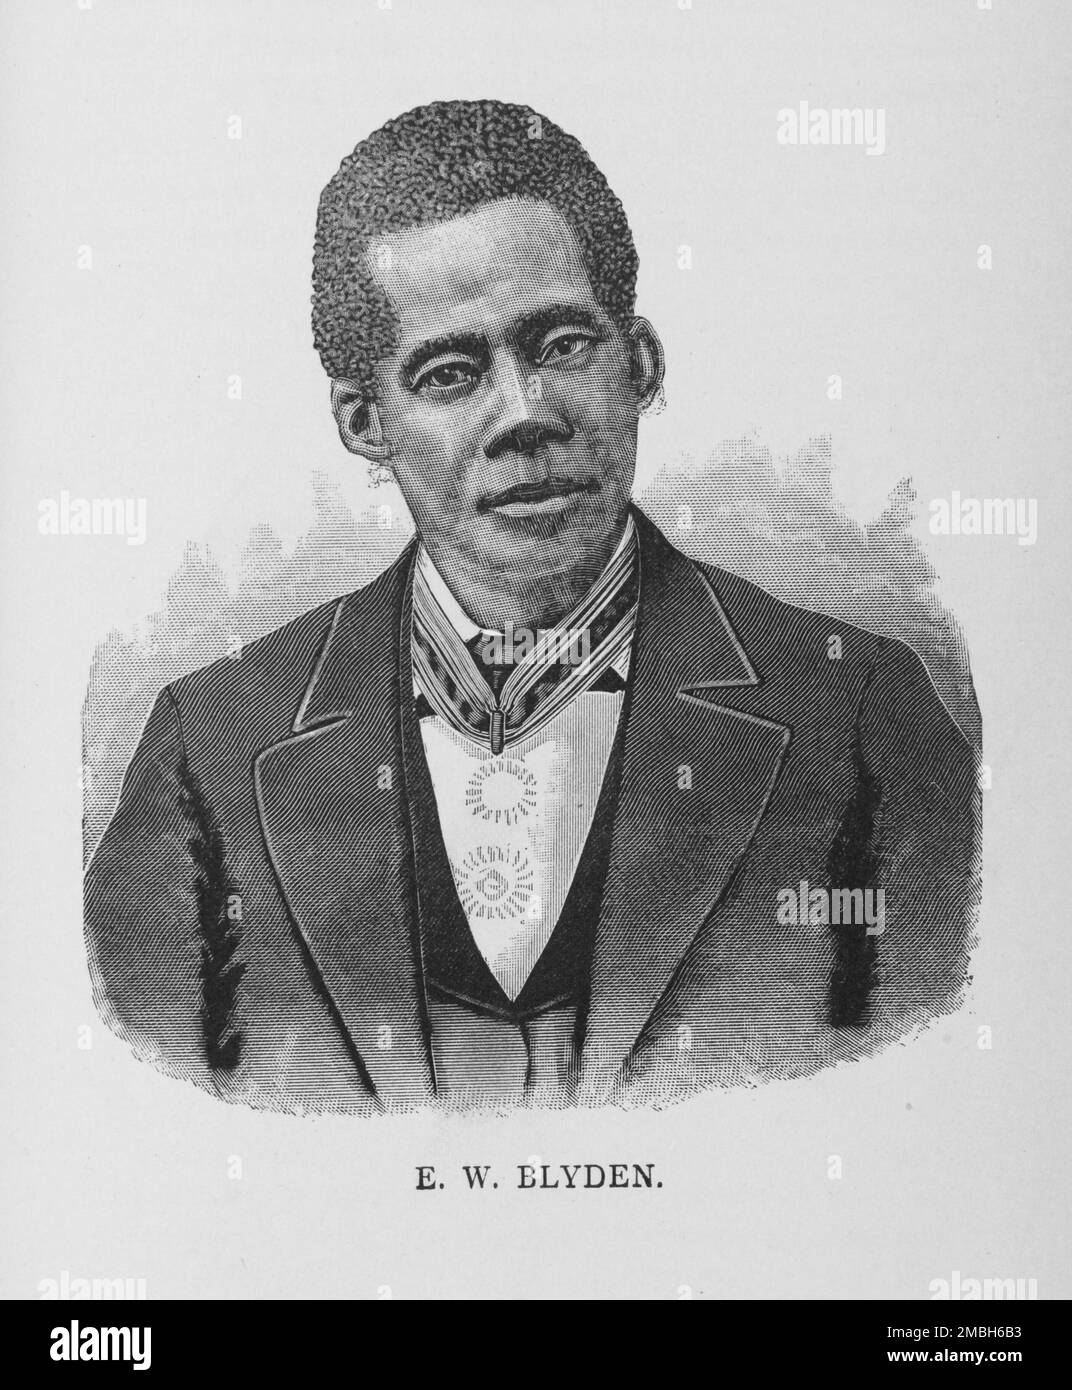 E. W. Blyden, 1887. Liberian educator, writer, diplomat, and politician Edward Wilmot Blyden was born in the Danish West Indies to free black parents who claimed descent from the Igbo people of present-day Nigeria. He joined the waves of black immigrants from the Americas who migrated to Africa. From &quot;Men of Mark: Eminent, Progressive and Rising&quot; by William J. Simmons. Stock Photo